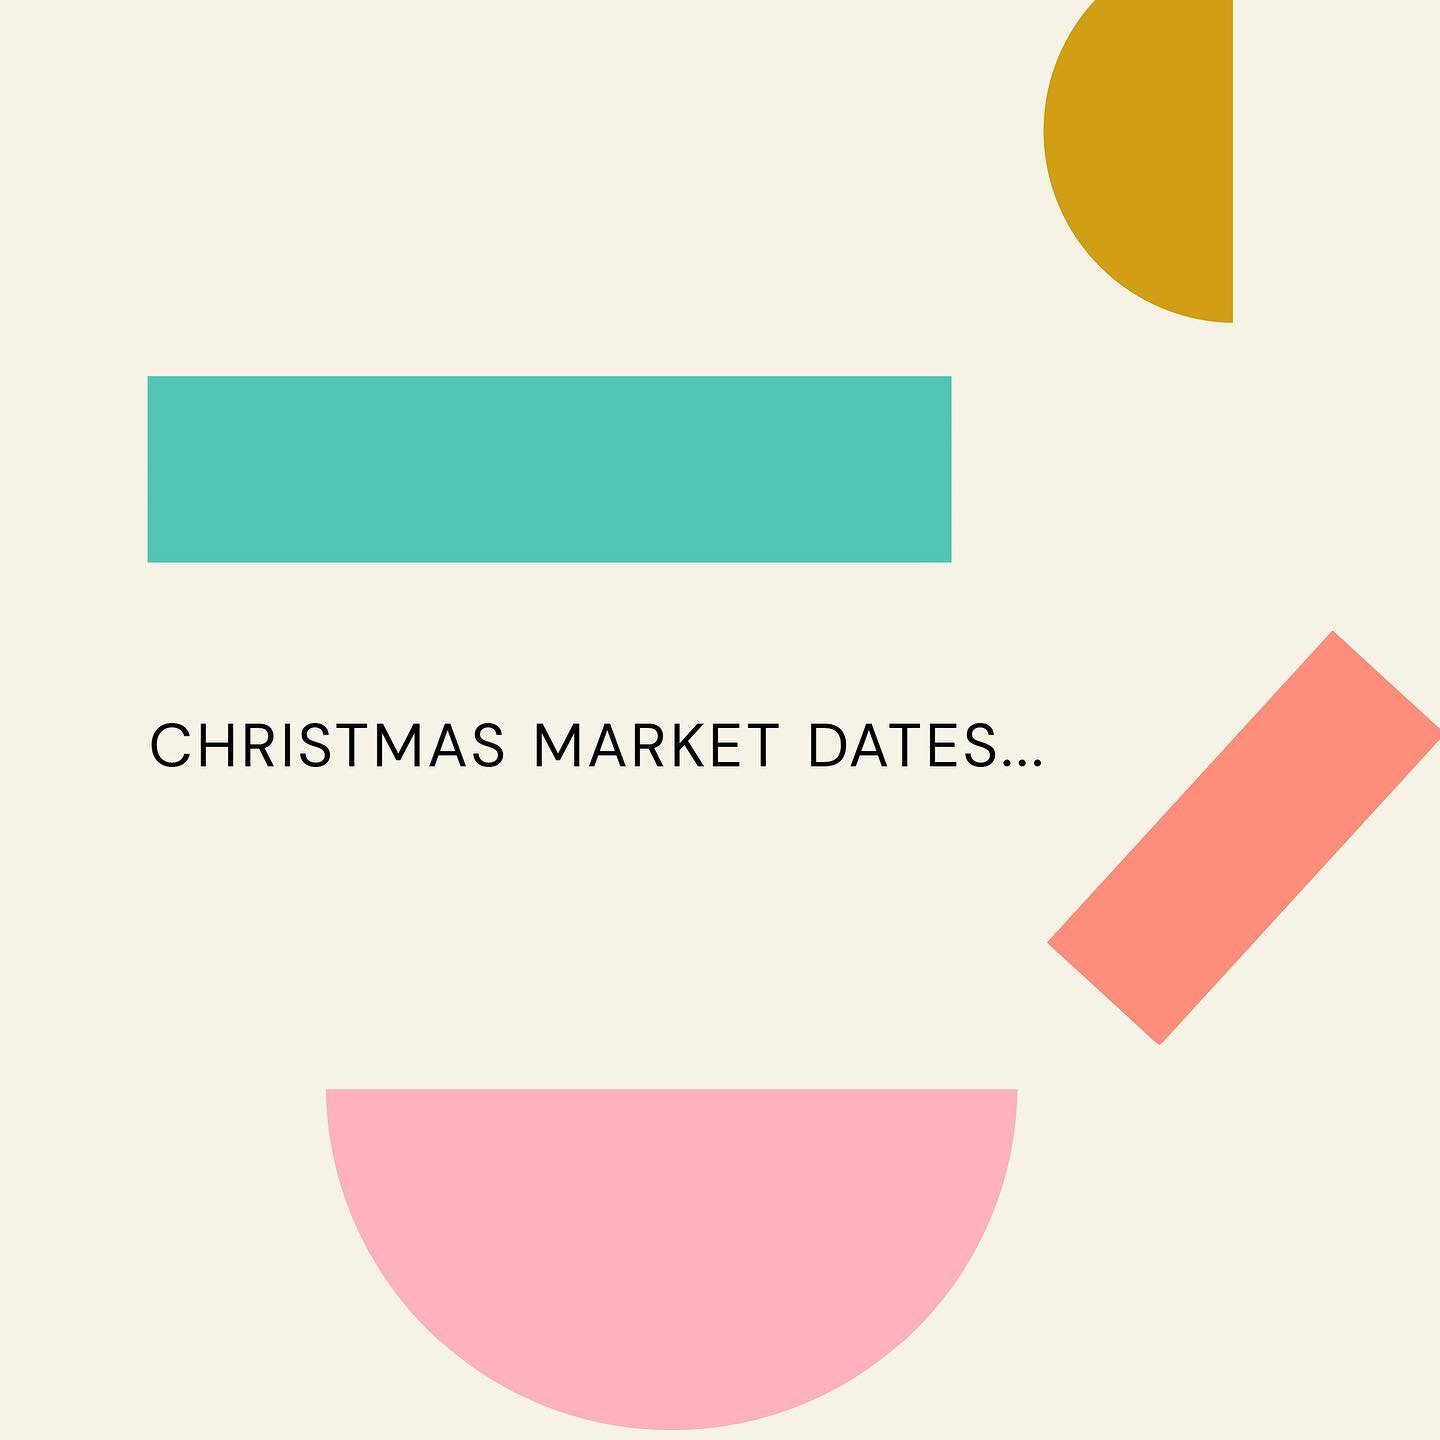 ✨CHRISTMAS MARKET DATES✨

I know it&rsquo;s 1st November and the news is bleak&hellip;but we all need to find the tiniest bit of joy where we can right now and something to look forward too&hellip;

I am therefore DELIGHTED to let you know all of my 